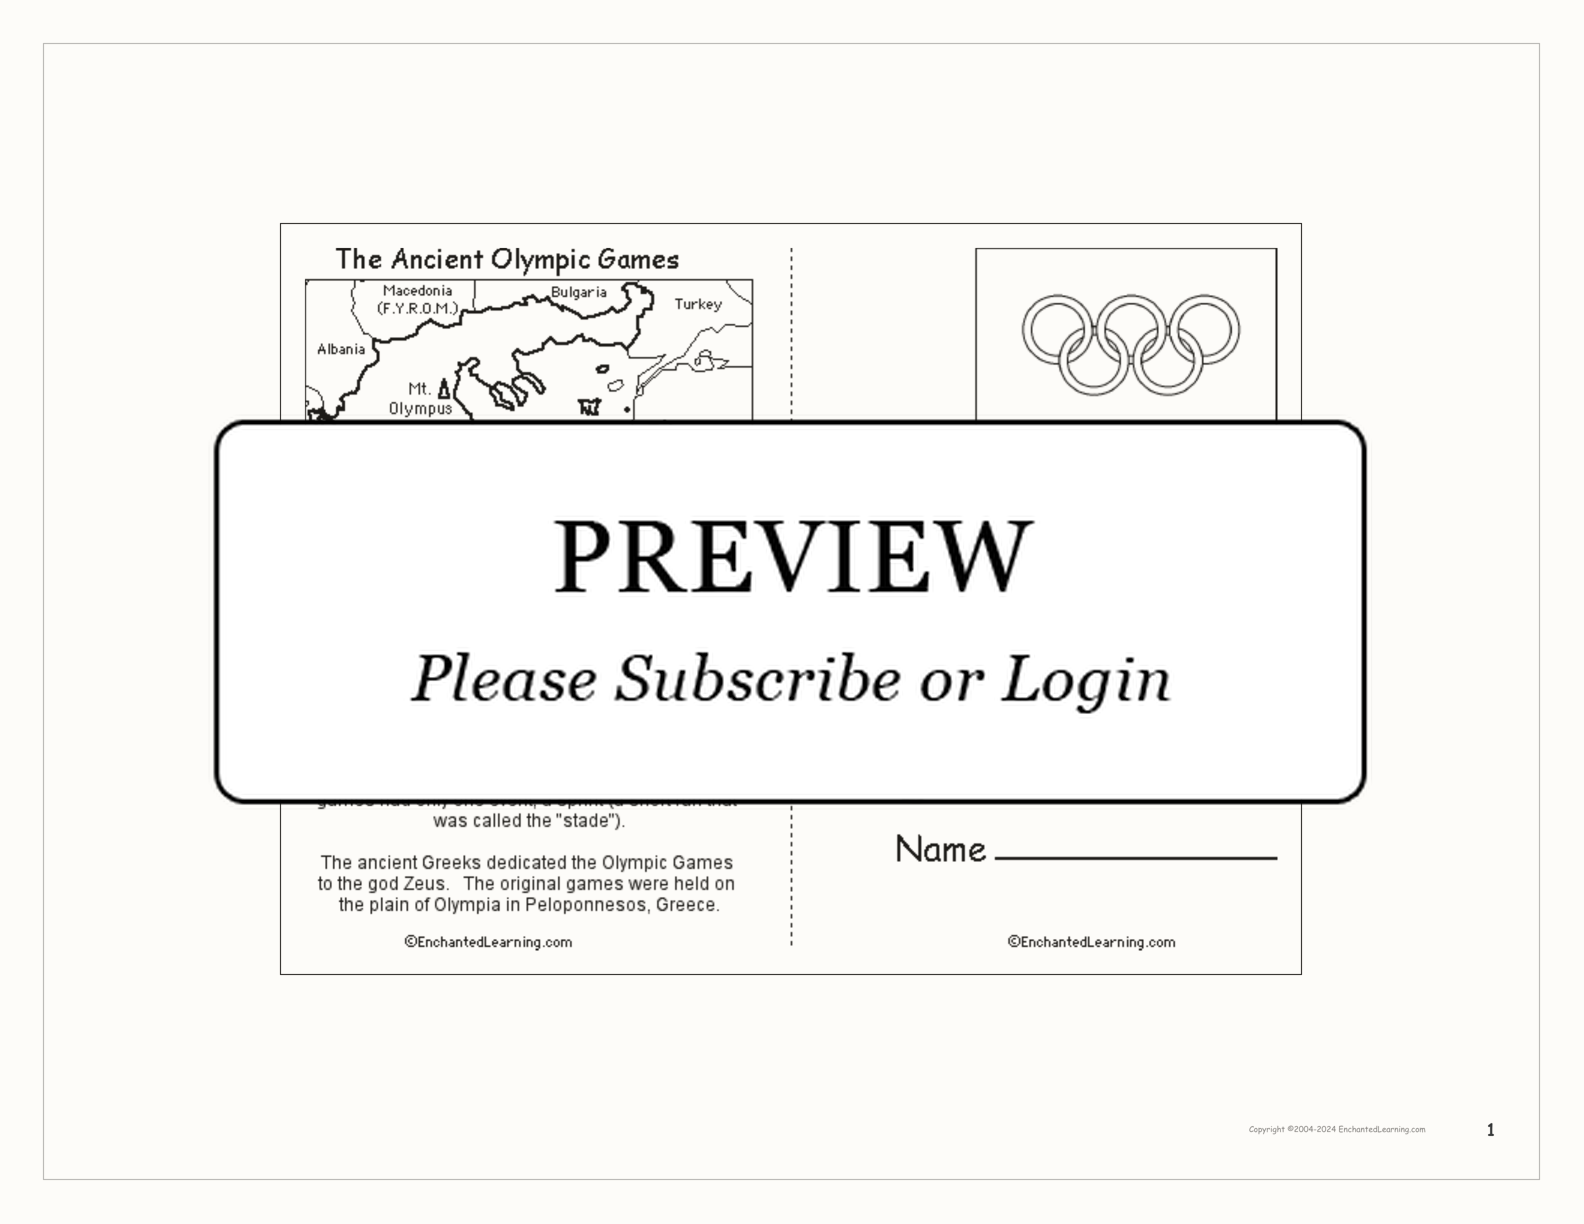 Olympic Games Book interactive printout page 1